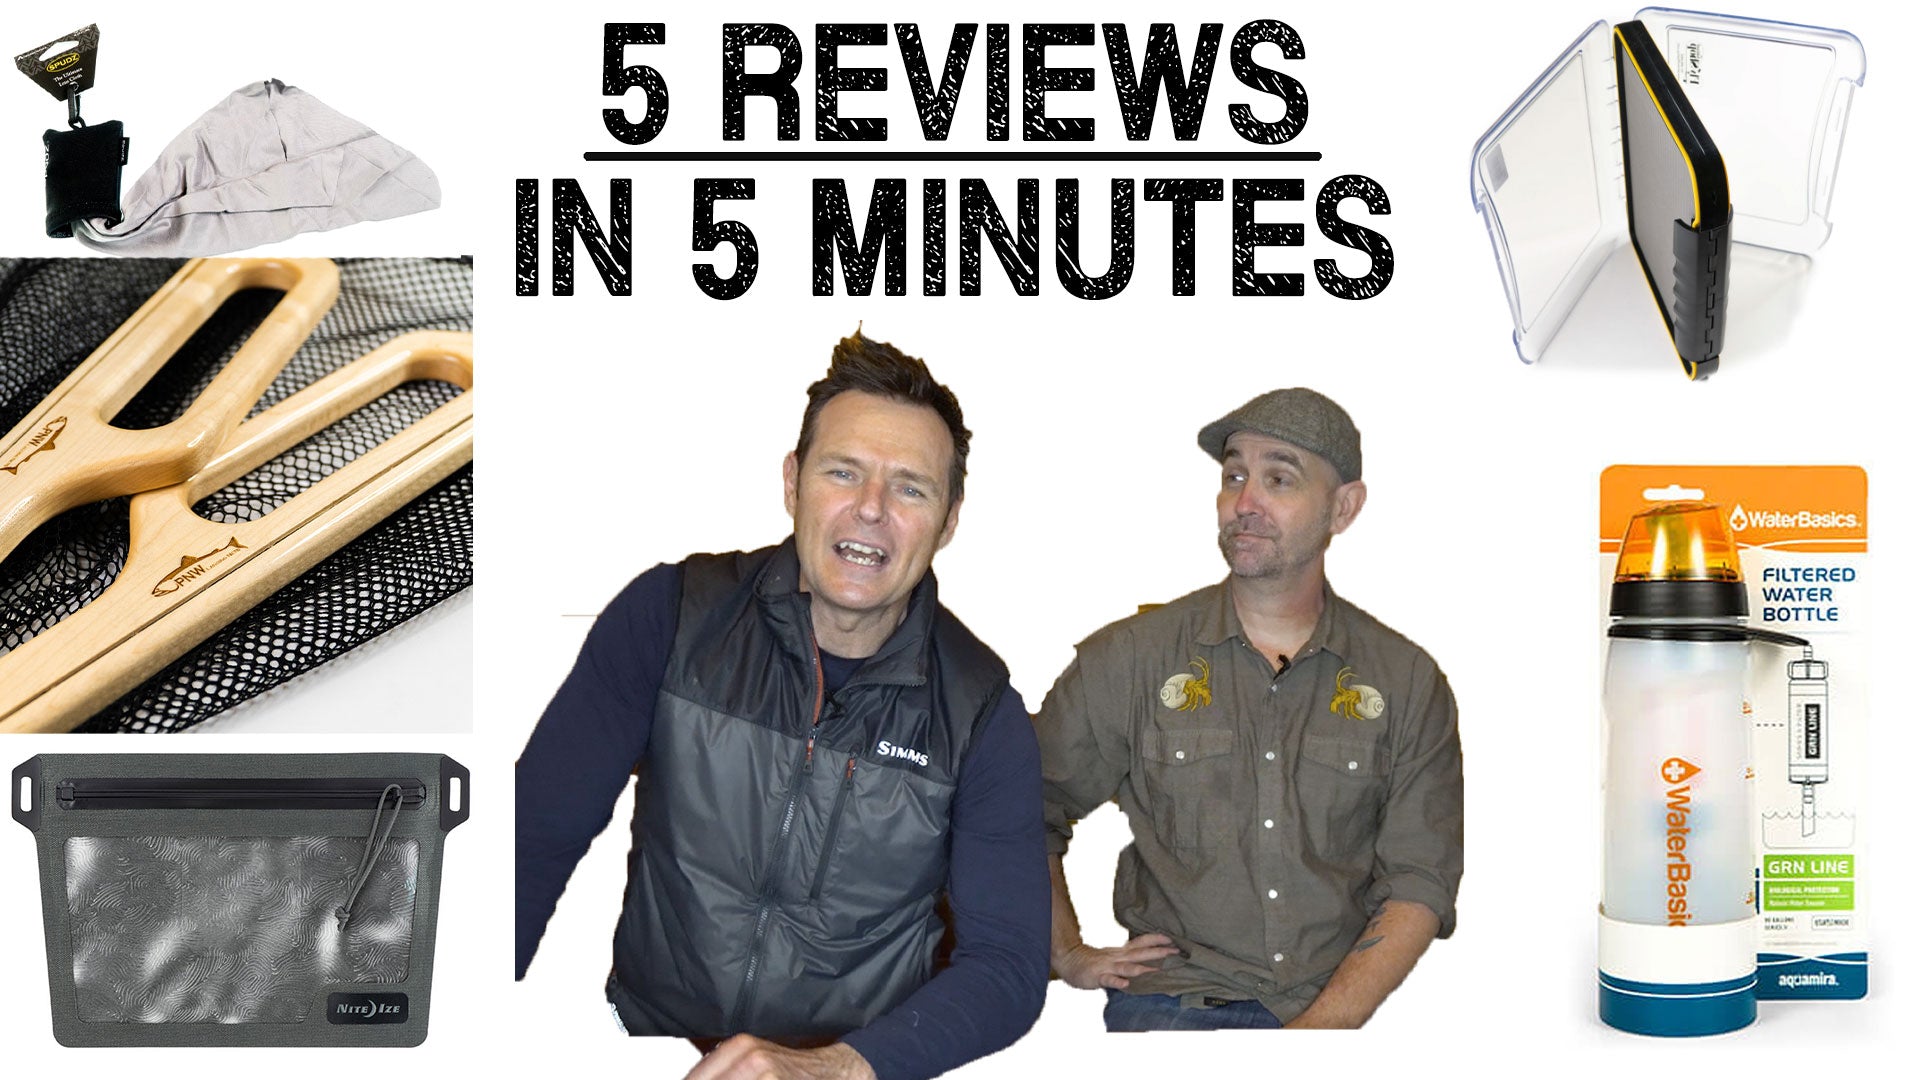 5 Reviews in 5 minutes Ep. 2